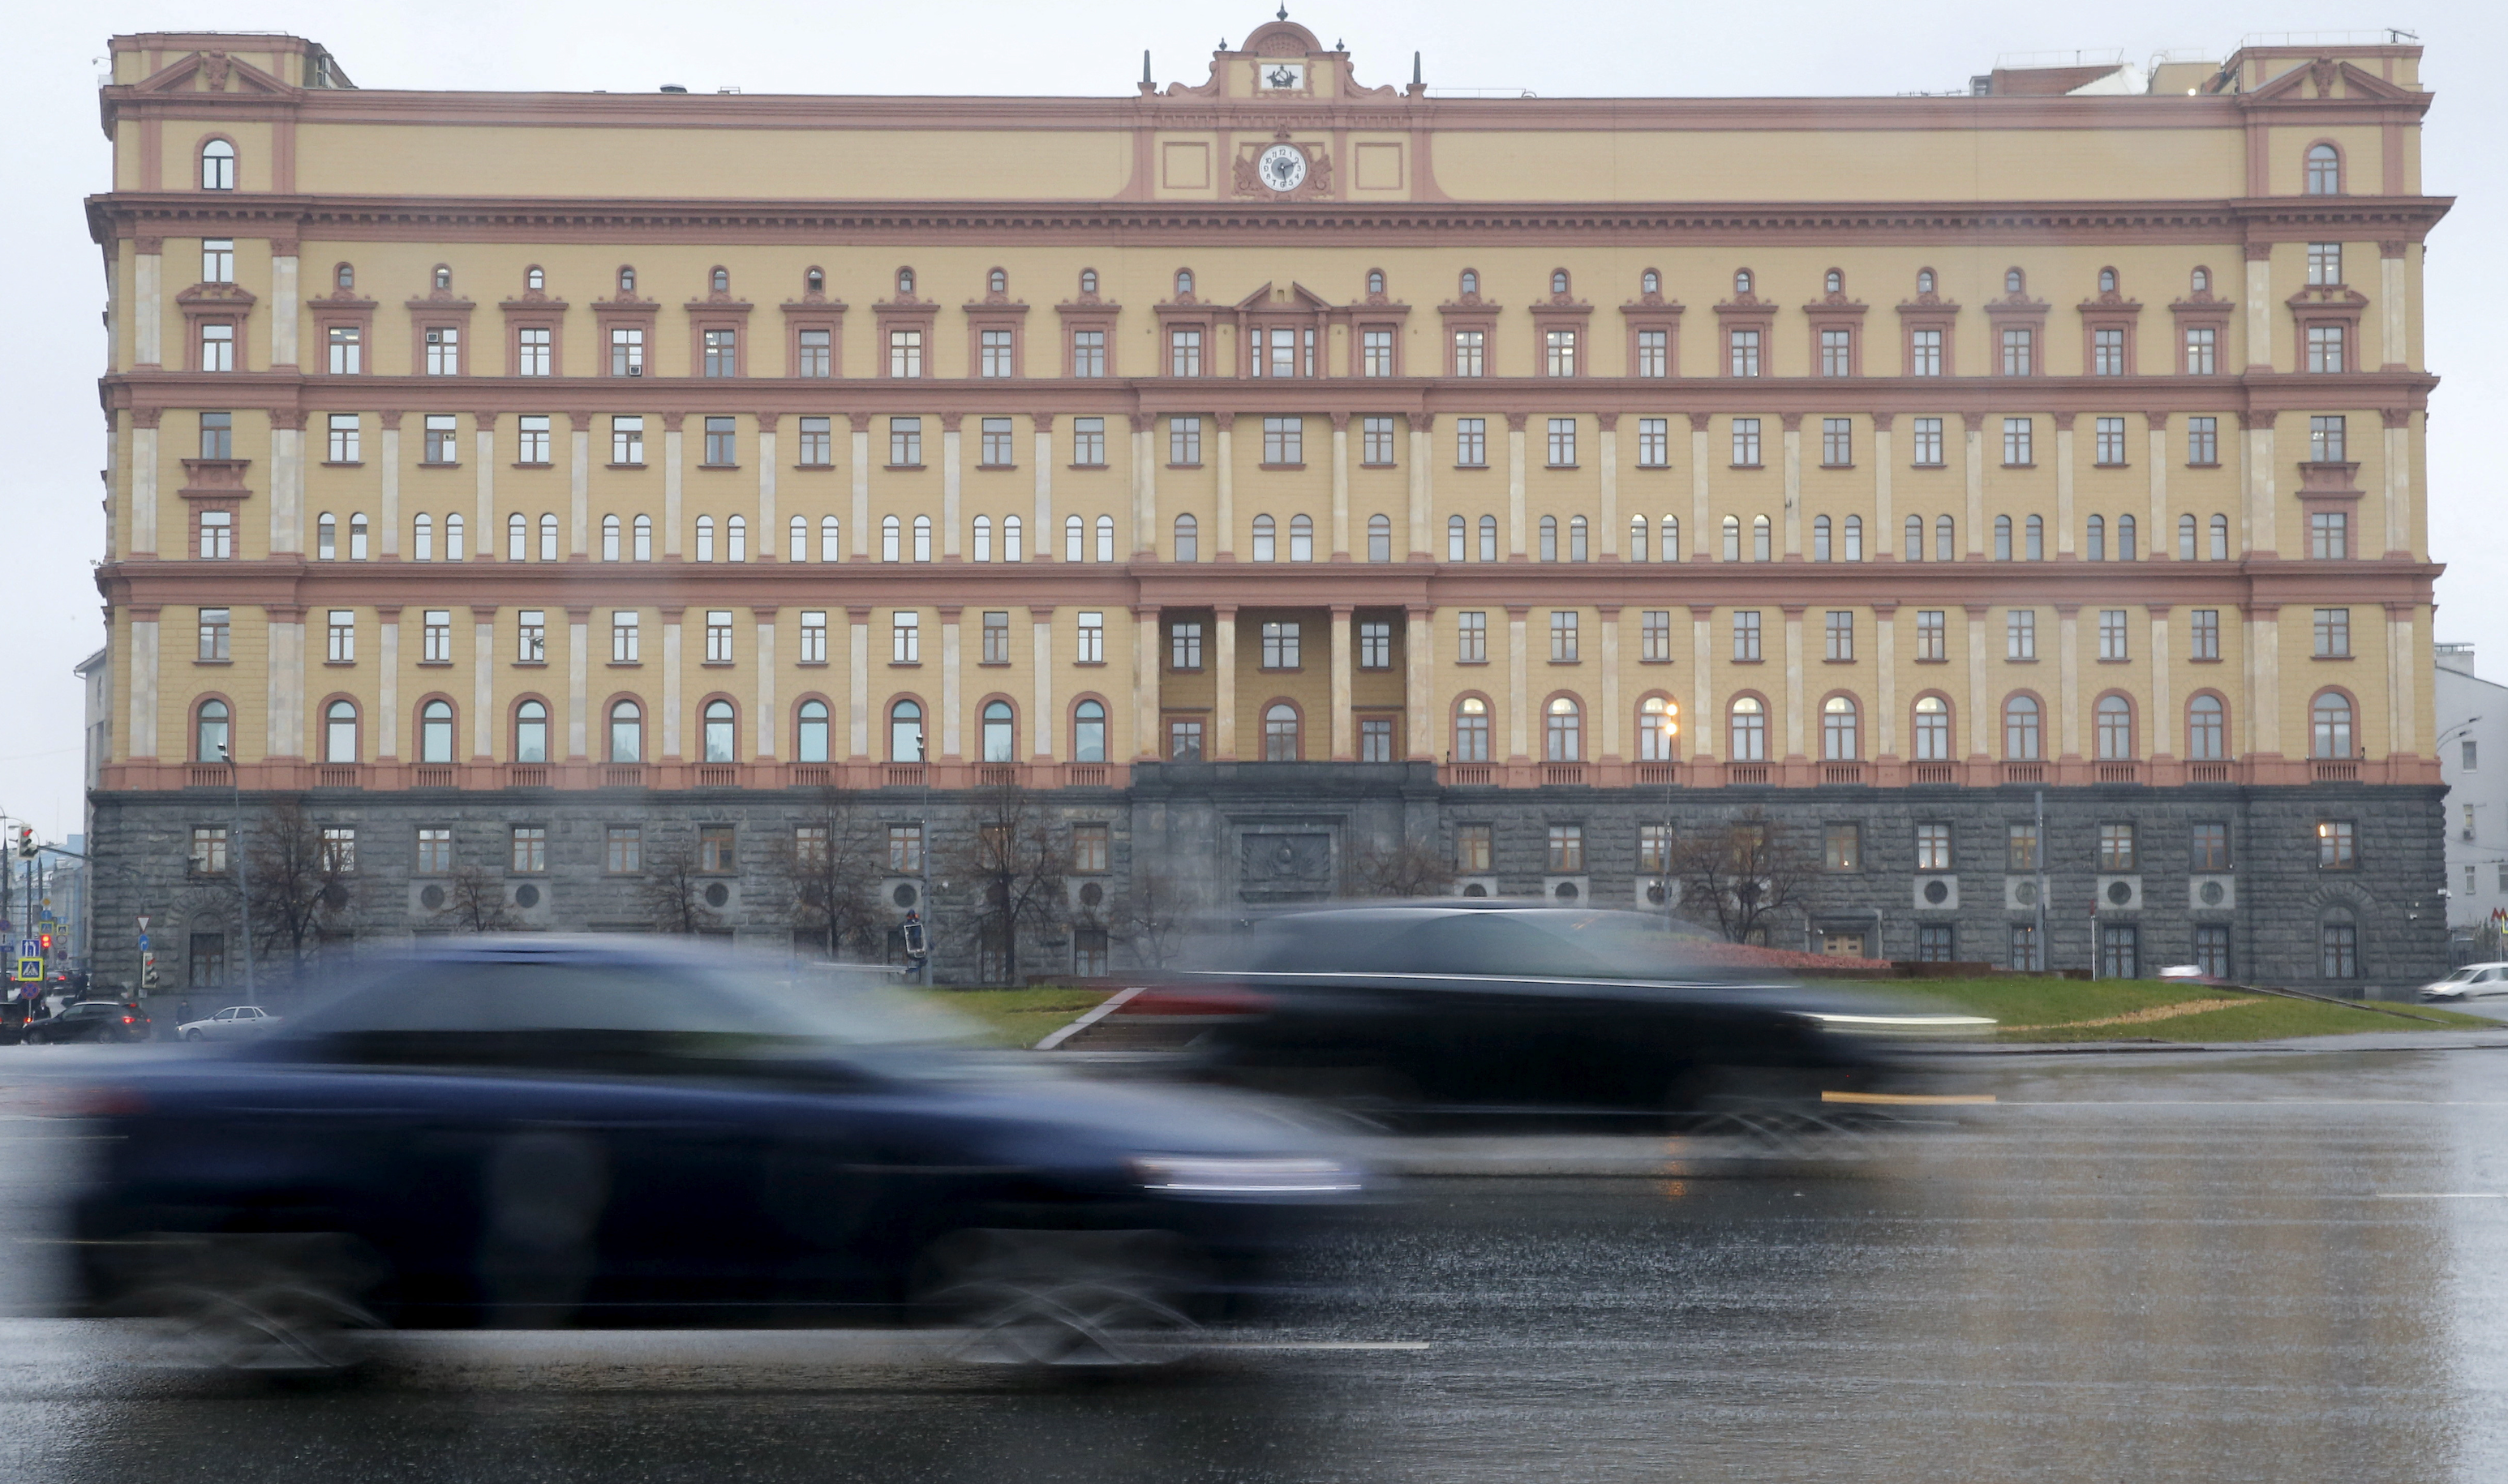 Russia tightens officials' travel rules due to fears over secrets, sources say